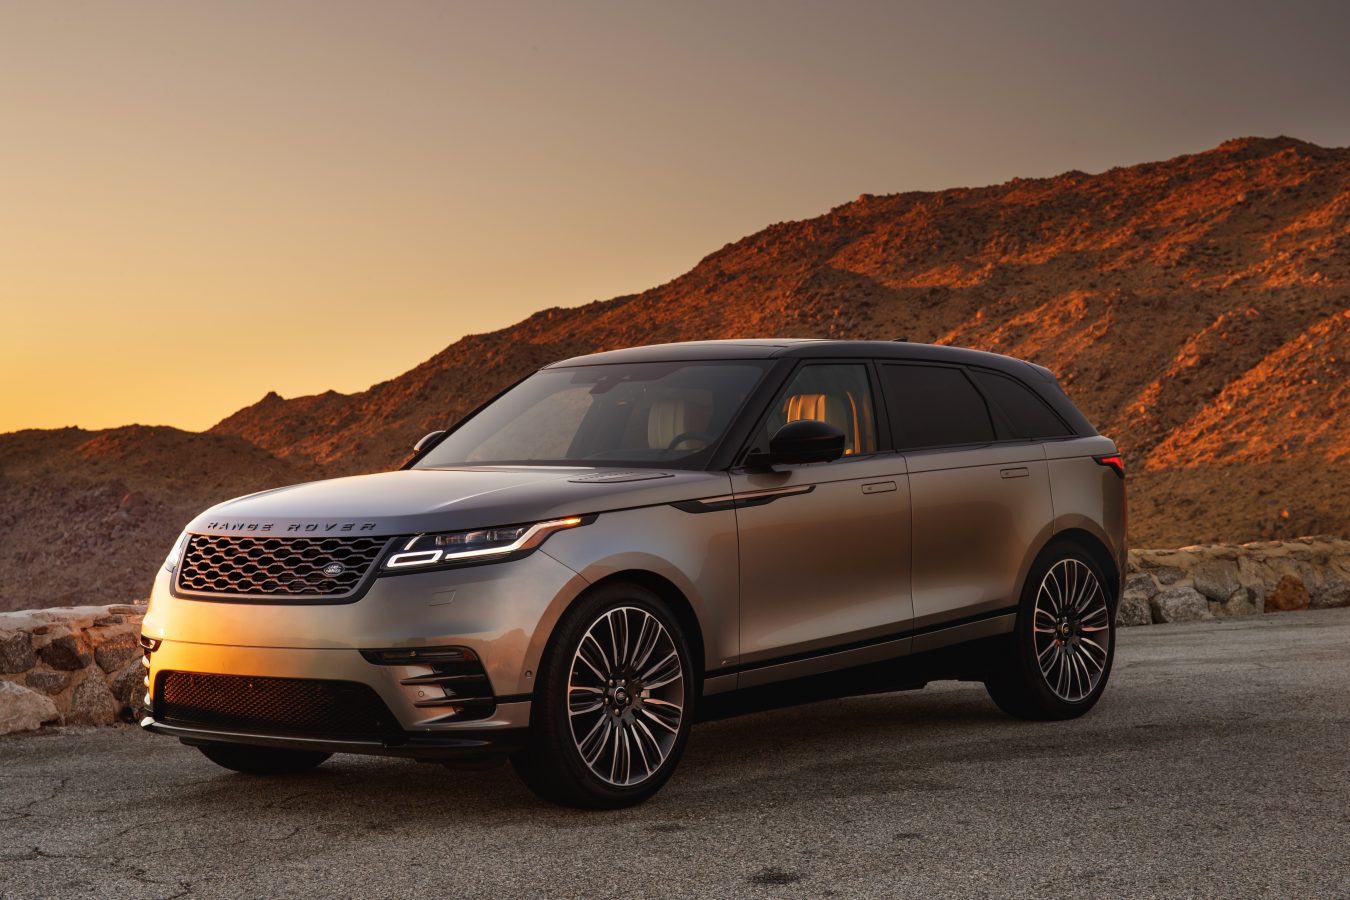 Range Rover Velar Colors  - An Extensive Palette Is Available For The Velar With The Base Model Having Access To A Total Of Thirty Different Hues And Finishes.